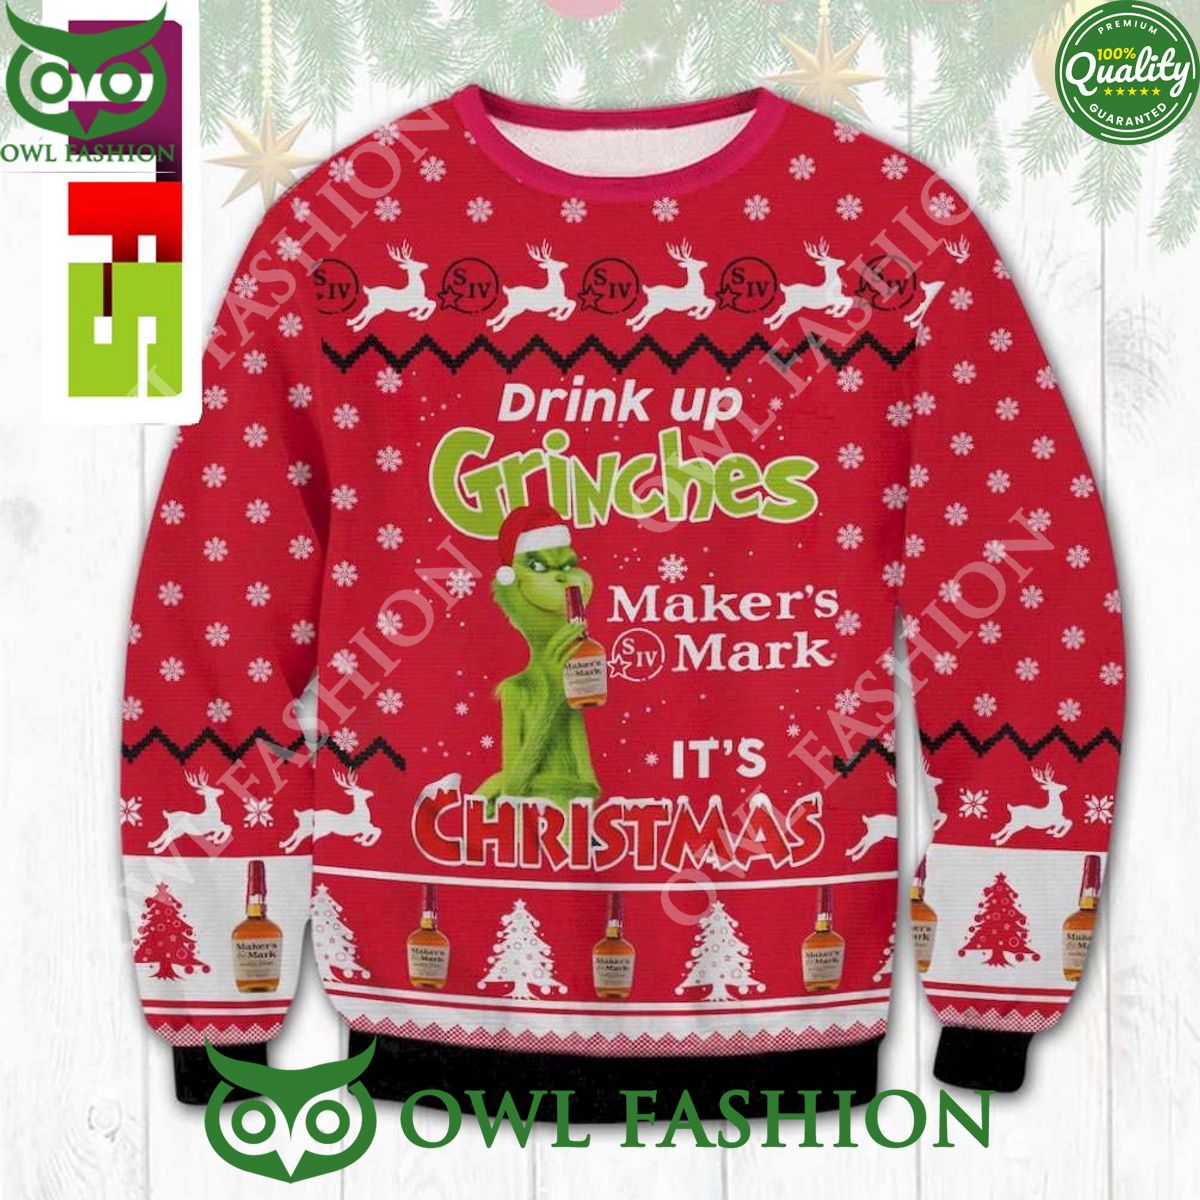 It's Christmas Maker's Mark Drink Up Grinches Xmas Ugly Sweater 2023